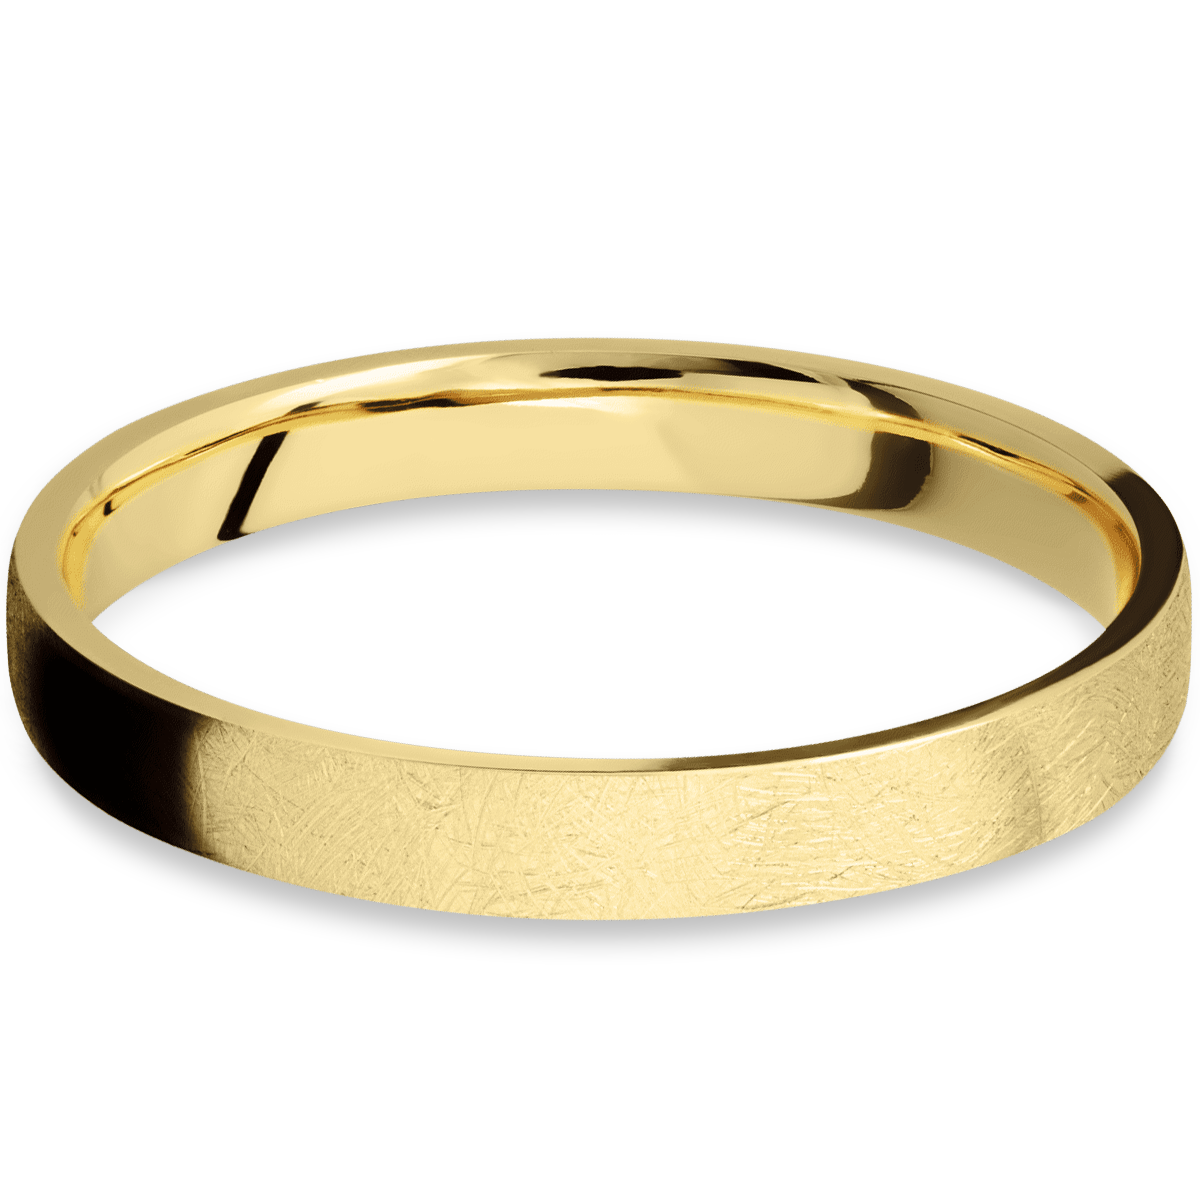 Yellow Gold + Distressed Finish Womens Wedding or Everyday Ring